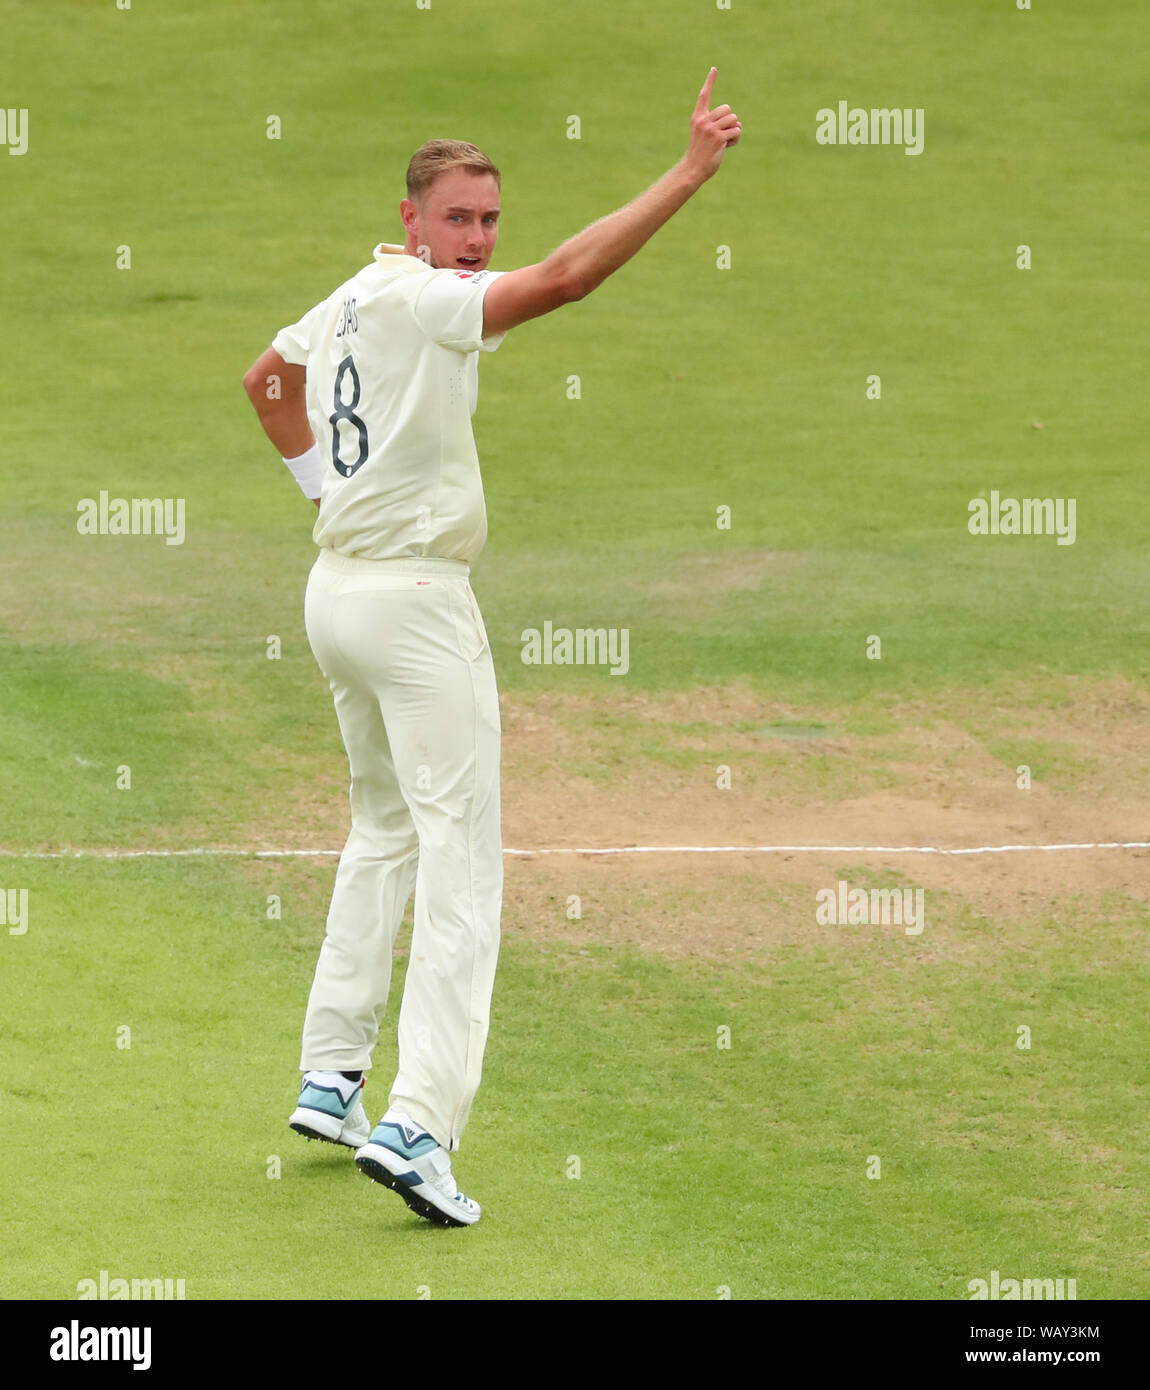 Leeds, UK. 22nd Aug, 2019. Stuart Broad of England appeals for the wicket of Usman Khawaja of Australia during day one of the 3rd Specsavers Ashes Test Match, at Headingley Cricket Ground, Leeds, England. Credit: ESPA/Alamy Live News Stock Photo